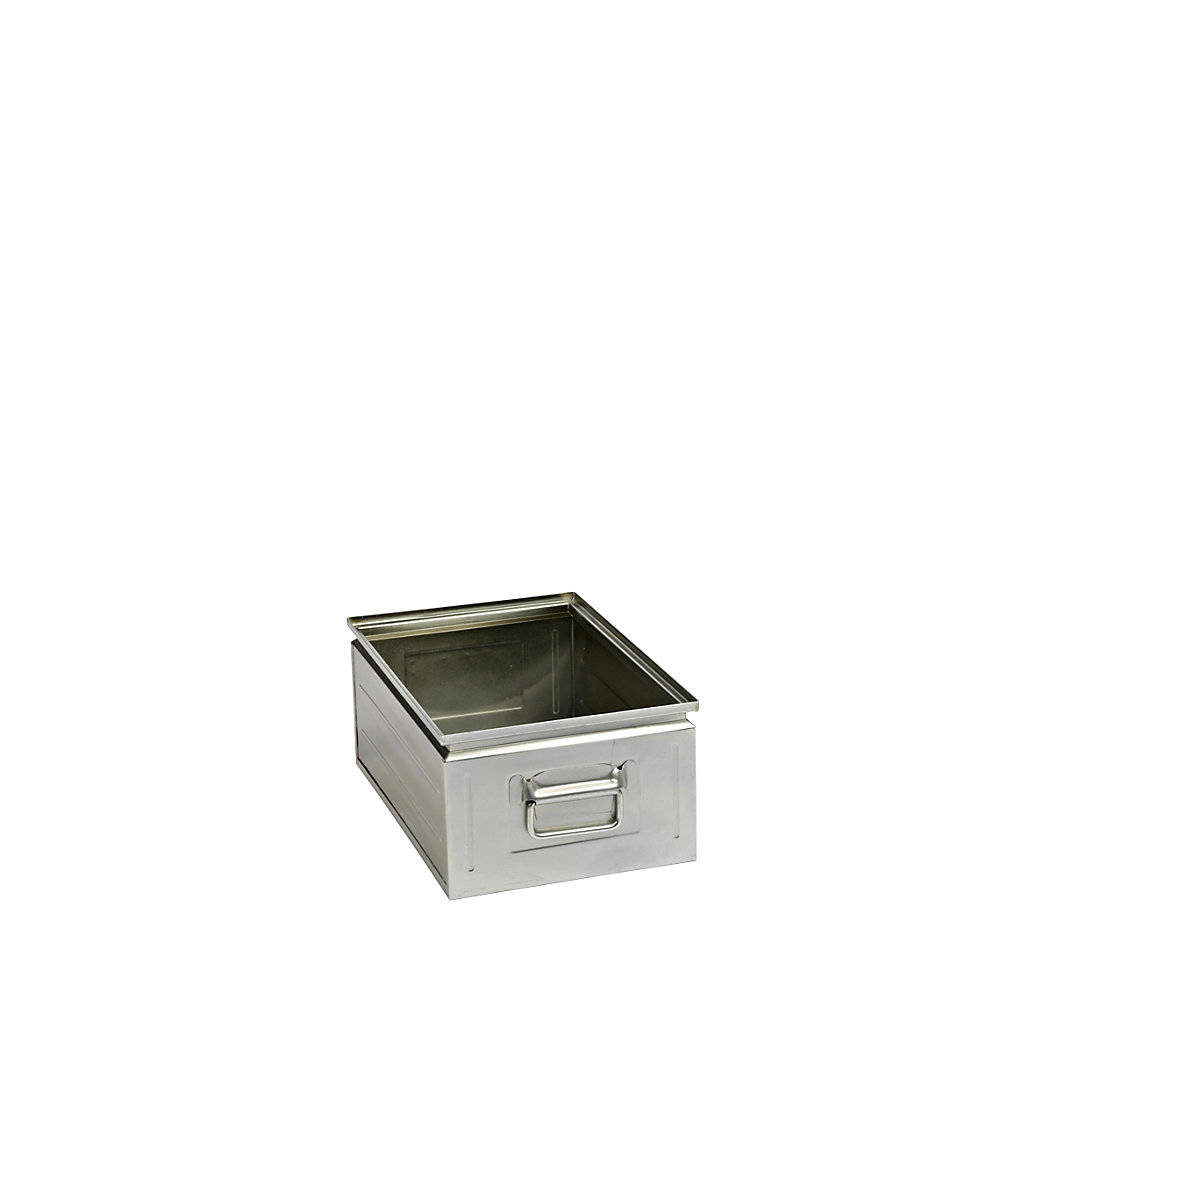 Stacking container made of sheet steel, capacity approx. 25 l, zinc plated